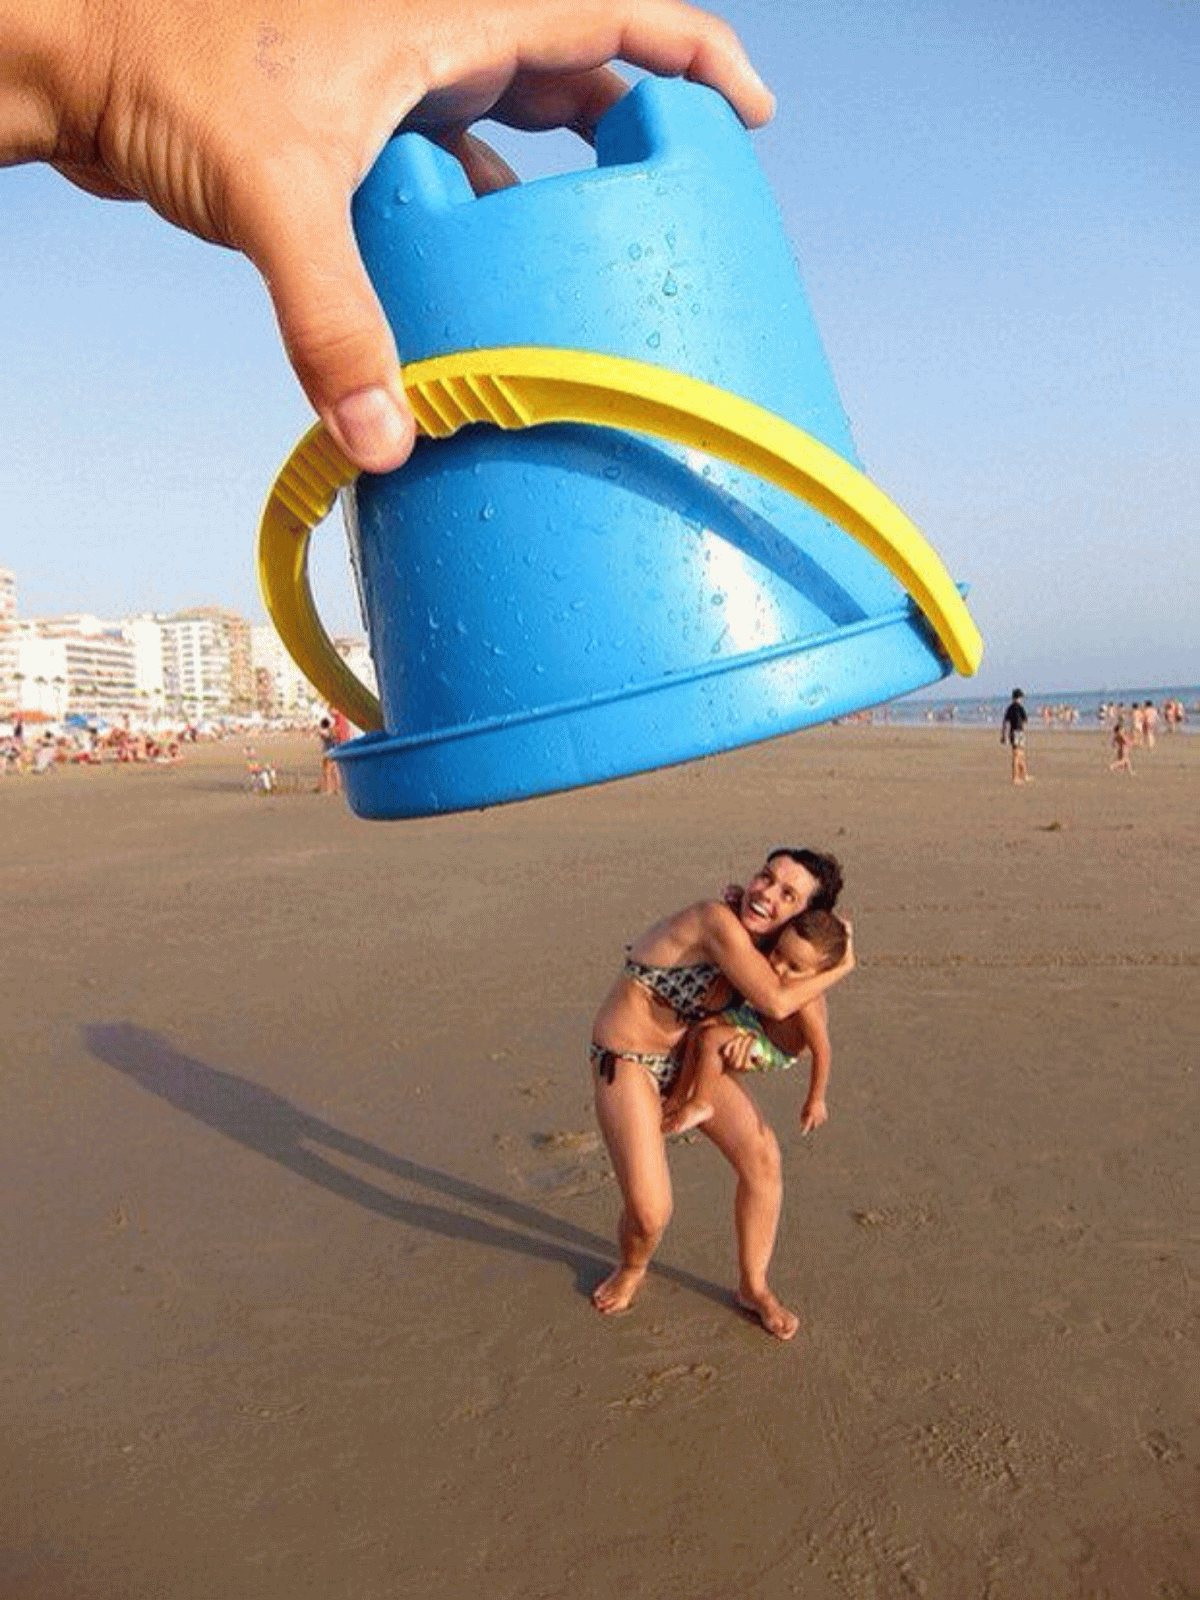 https://www.askideas.com/media/29/Beach-Illusion-Funny-Image-For-Whatsapp.png